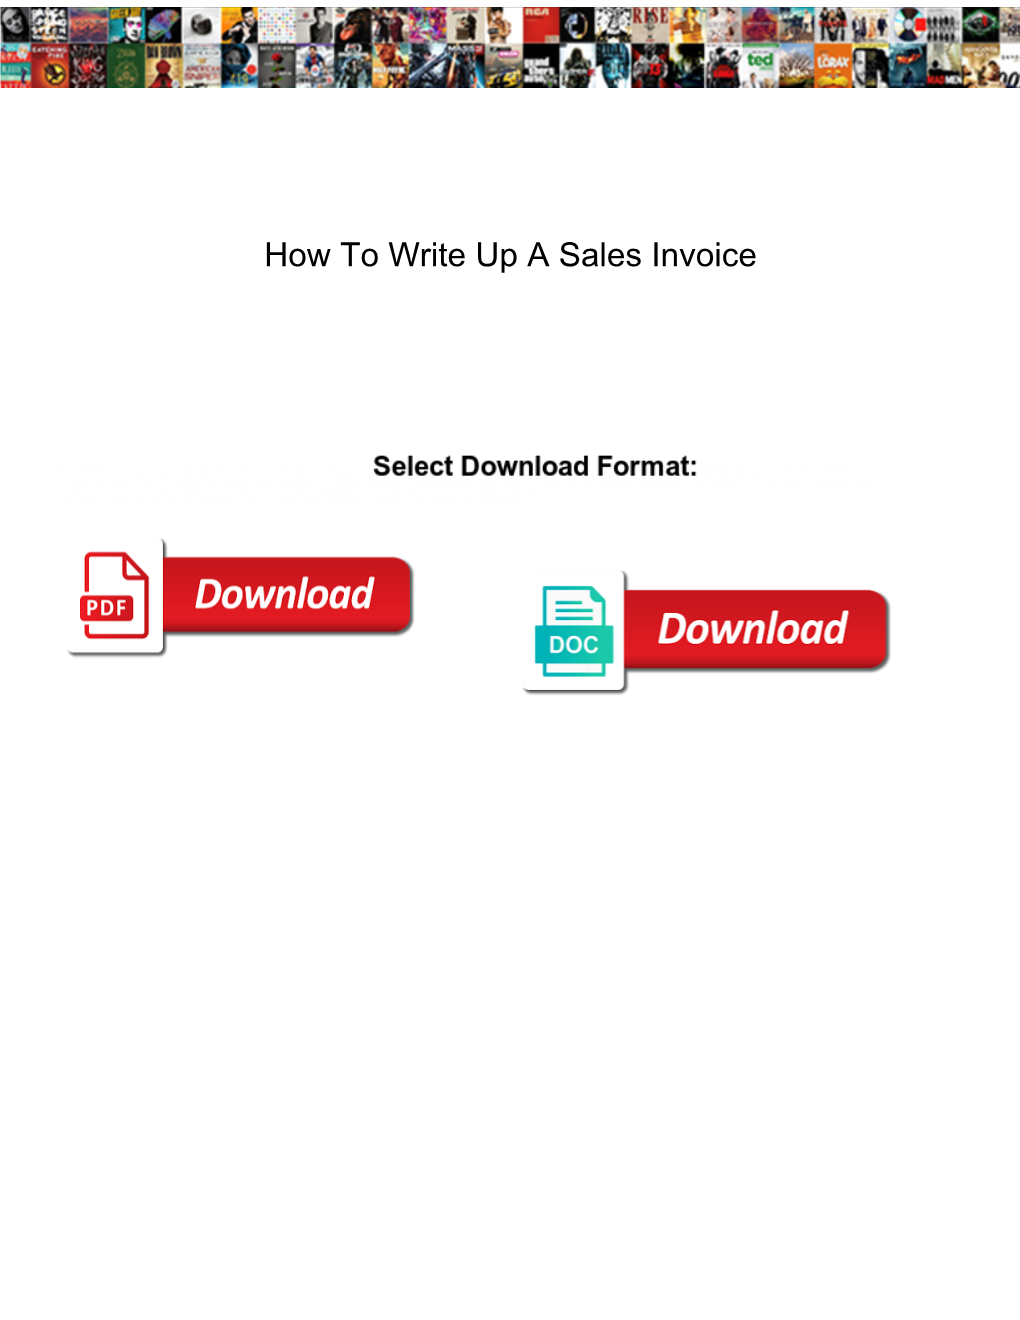 How to Write up a Sales Invoice